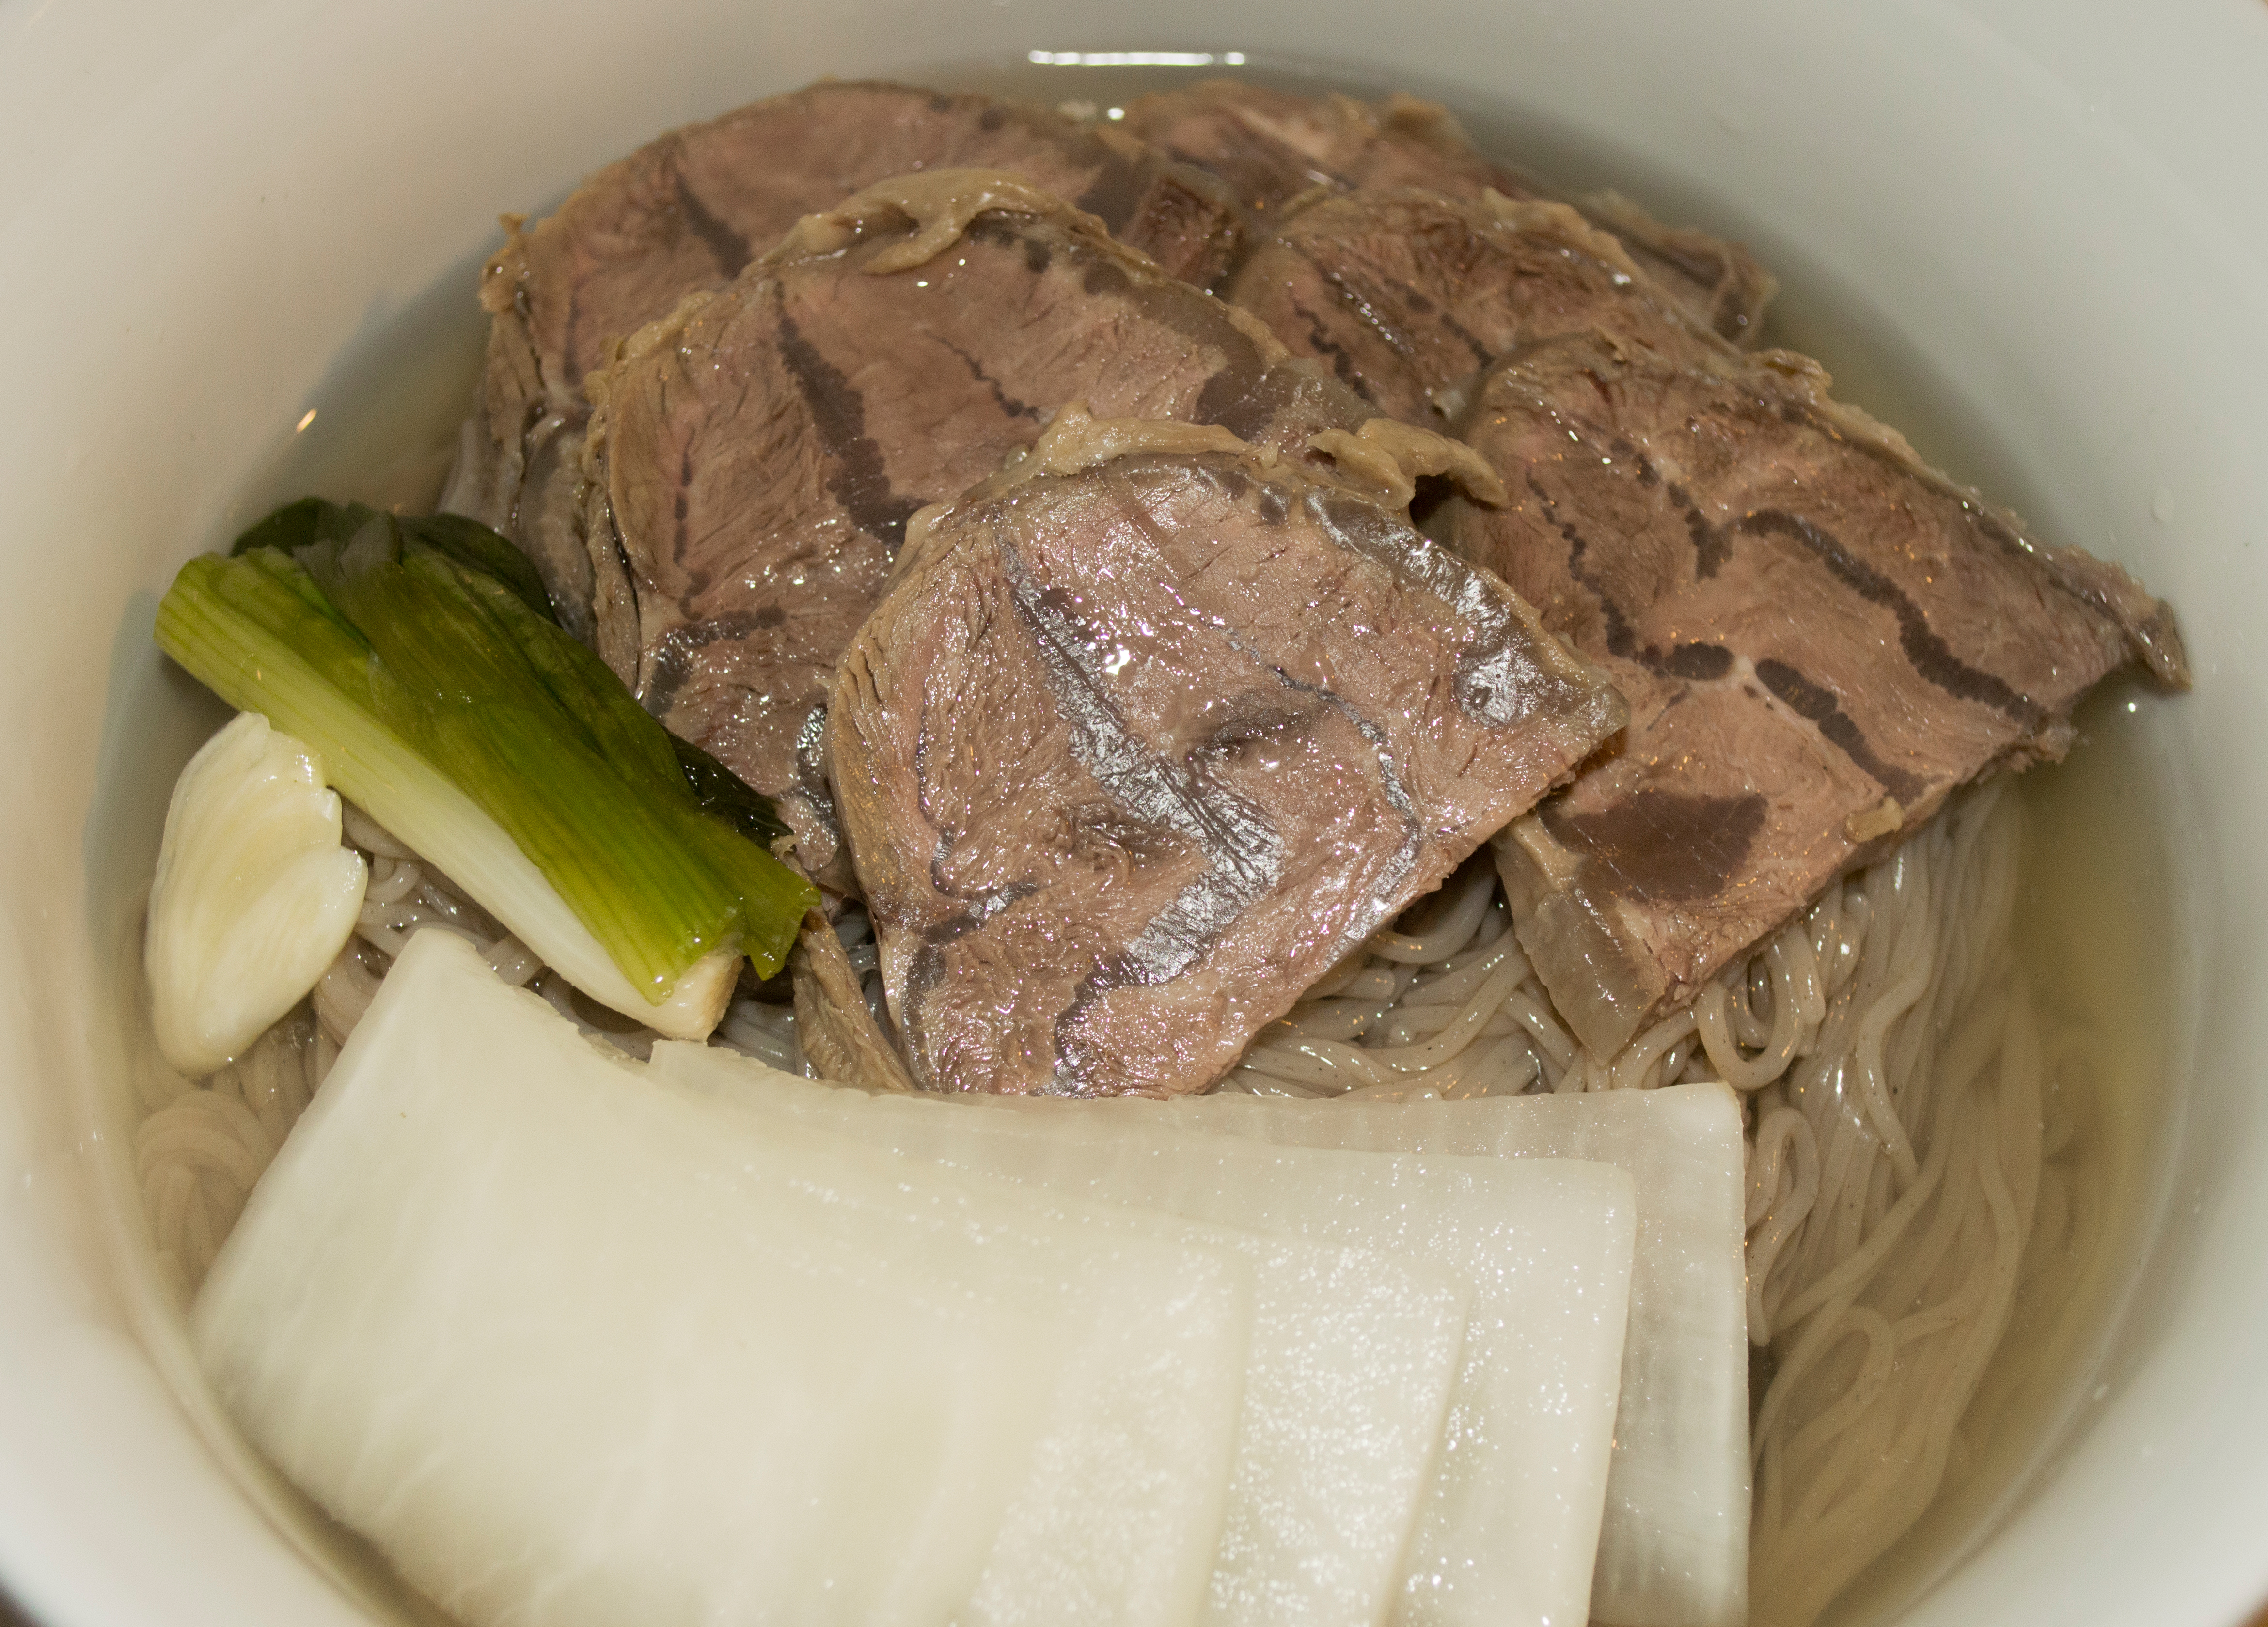 Cold Noodles in Broth - Naengmyeon with Beef Shin